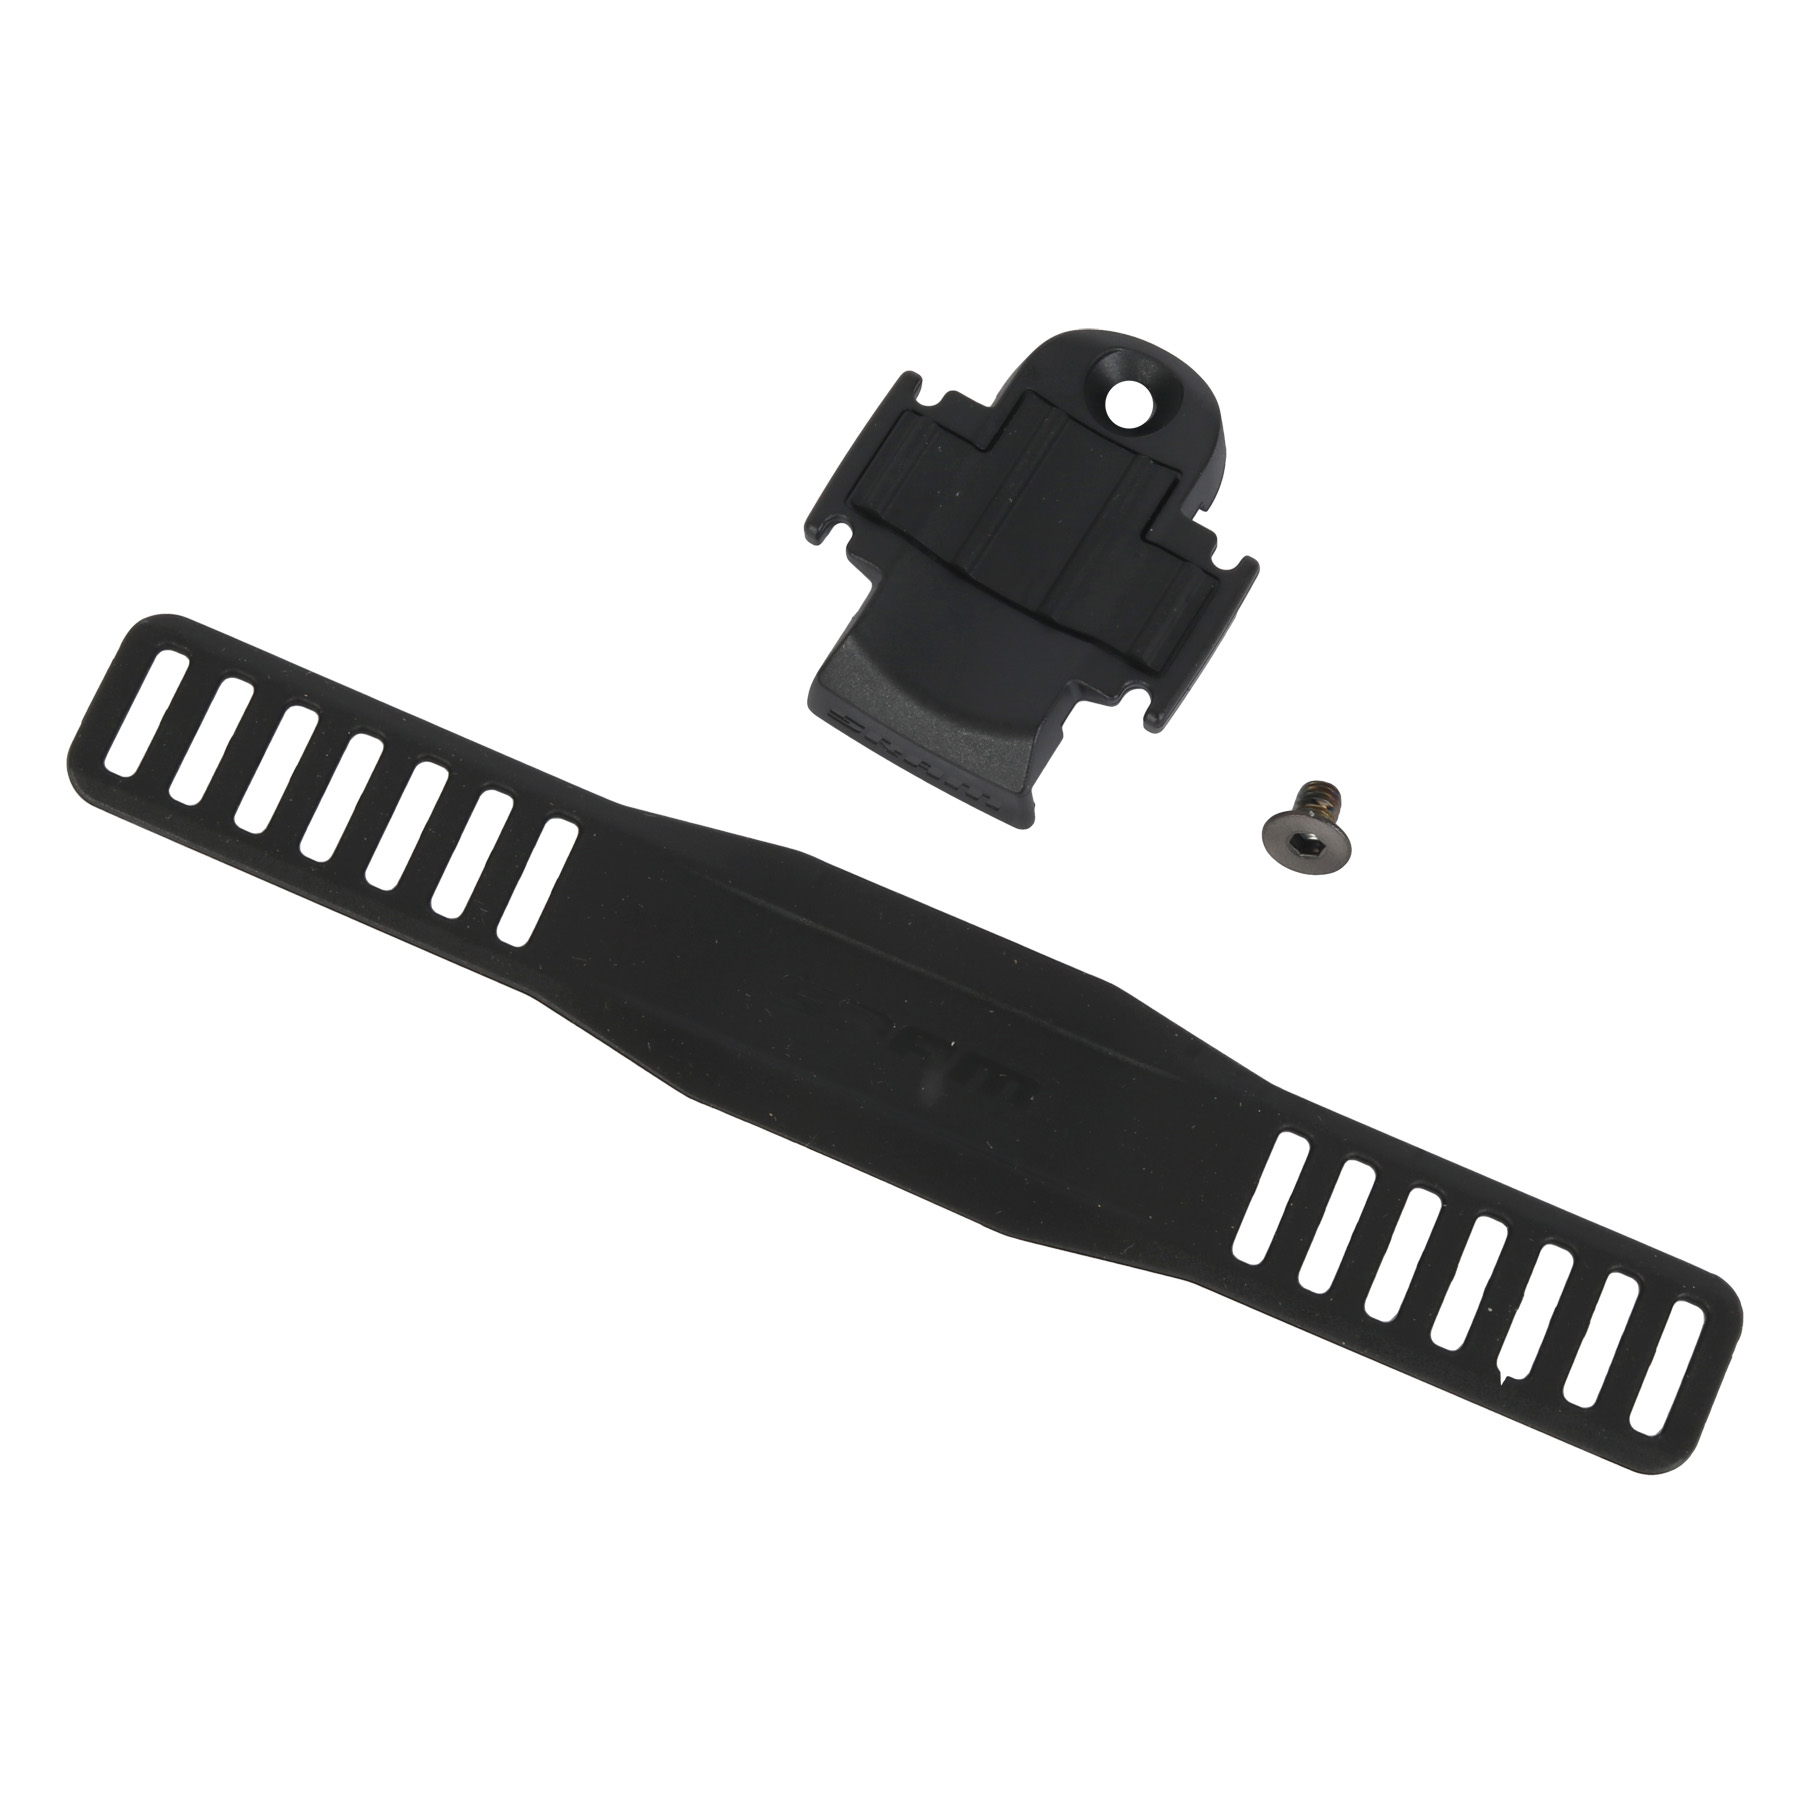 Picture of SRAM Mounting Kit for Blipbox - Bracket + Strap | 11.3018.024.000